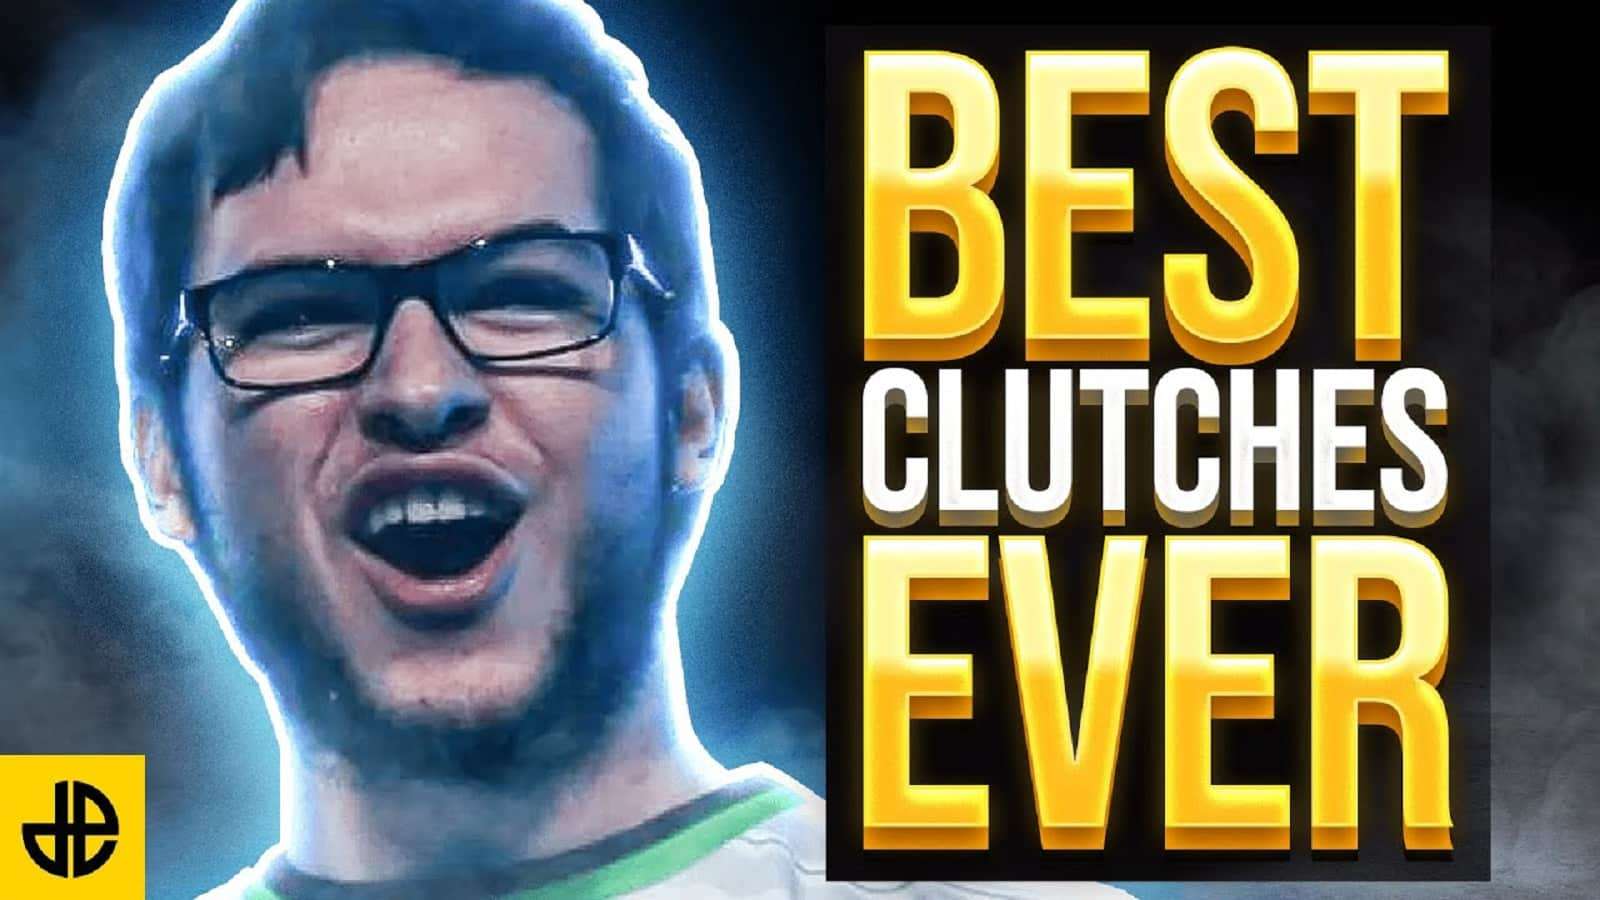 The CRAZIEST COD Search and Destroy Clutches EVER!